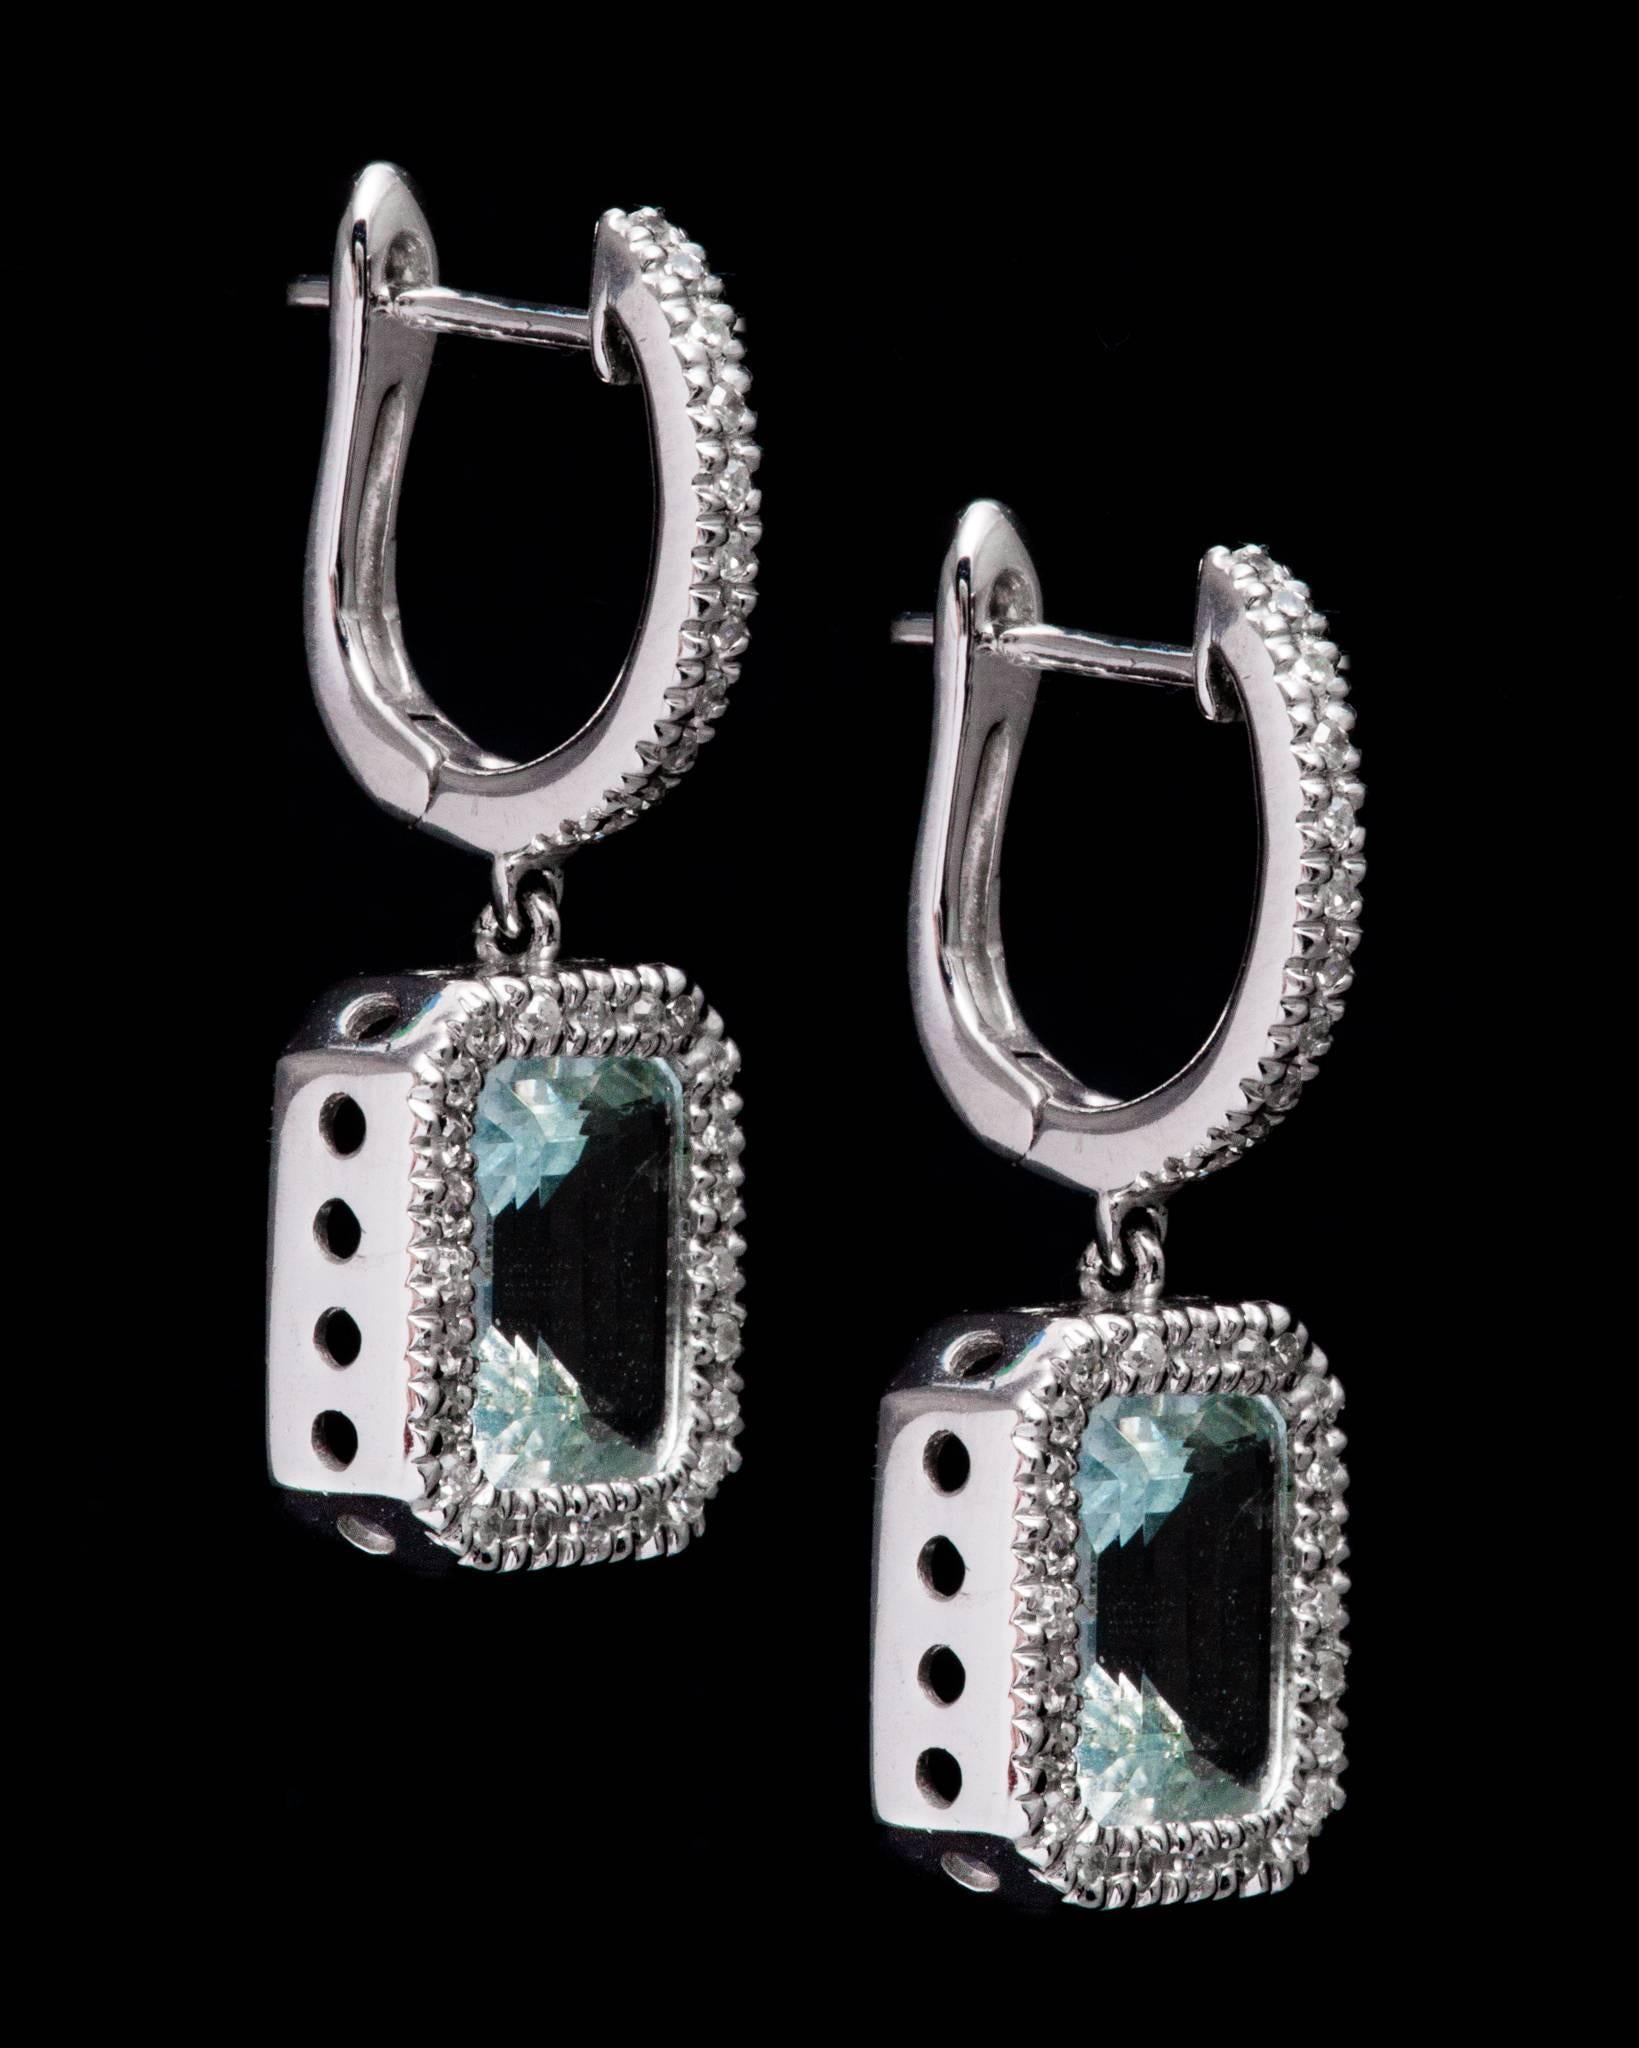 A beautiful pair of dangling aquamarine, and diamond earrings in 14 karat white gold. Each earring is centered by a 1.50 carat rich vivid sky blue aquamarine framed by sparkling pave set diamonds.  

Grading as VVS clarity the vivid sky blue